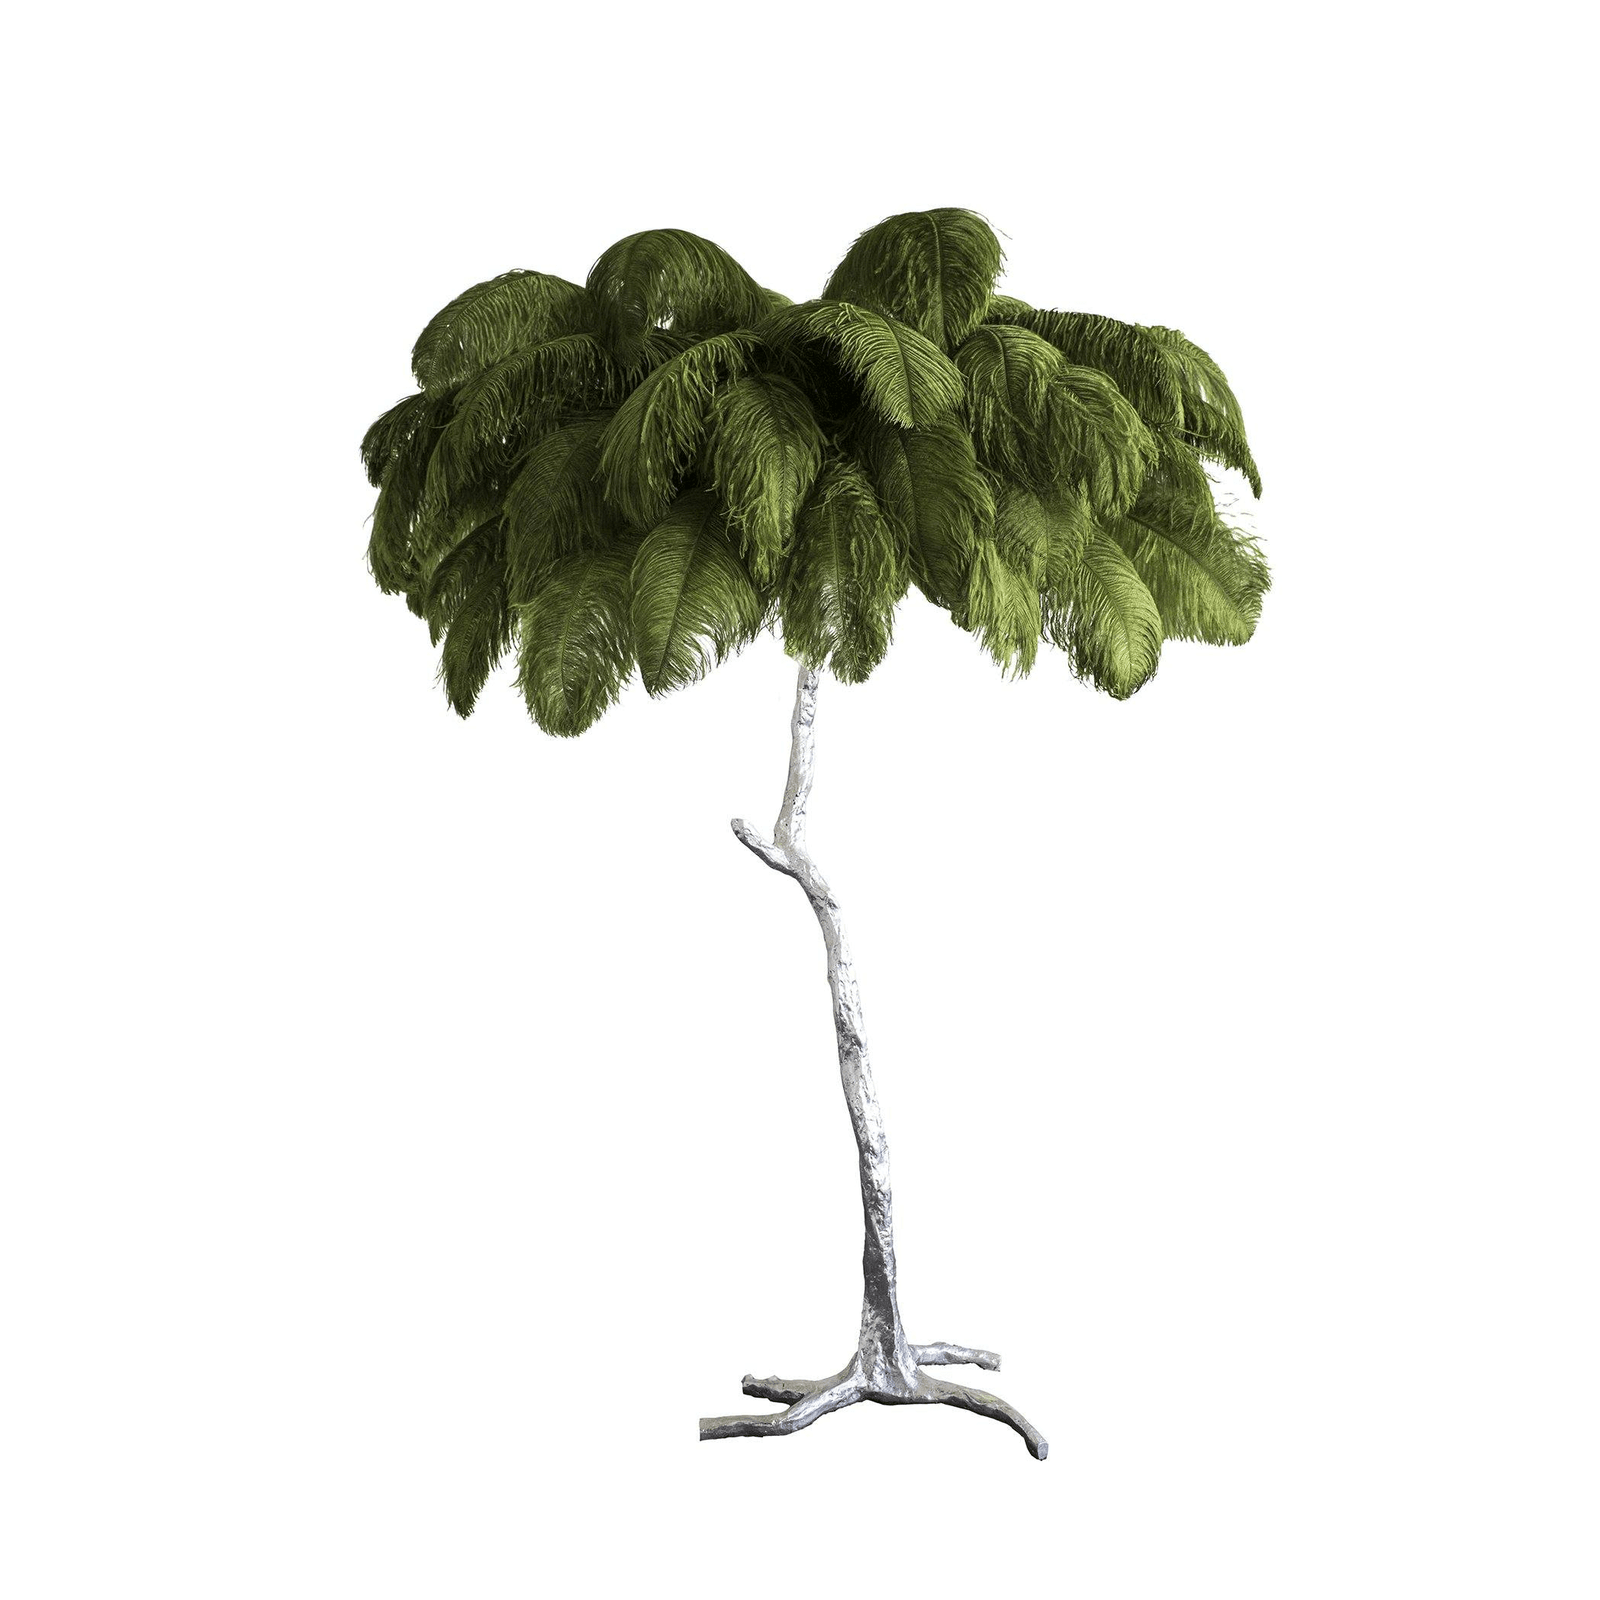 Silver Ostrich Feather Brass Floor Lamp, measuring 39.4" in diameter and 63" in height (or Dia 100cm x H 160cm), featuring Ivy green accents.